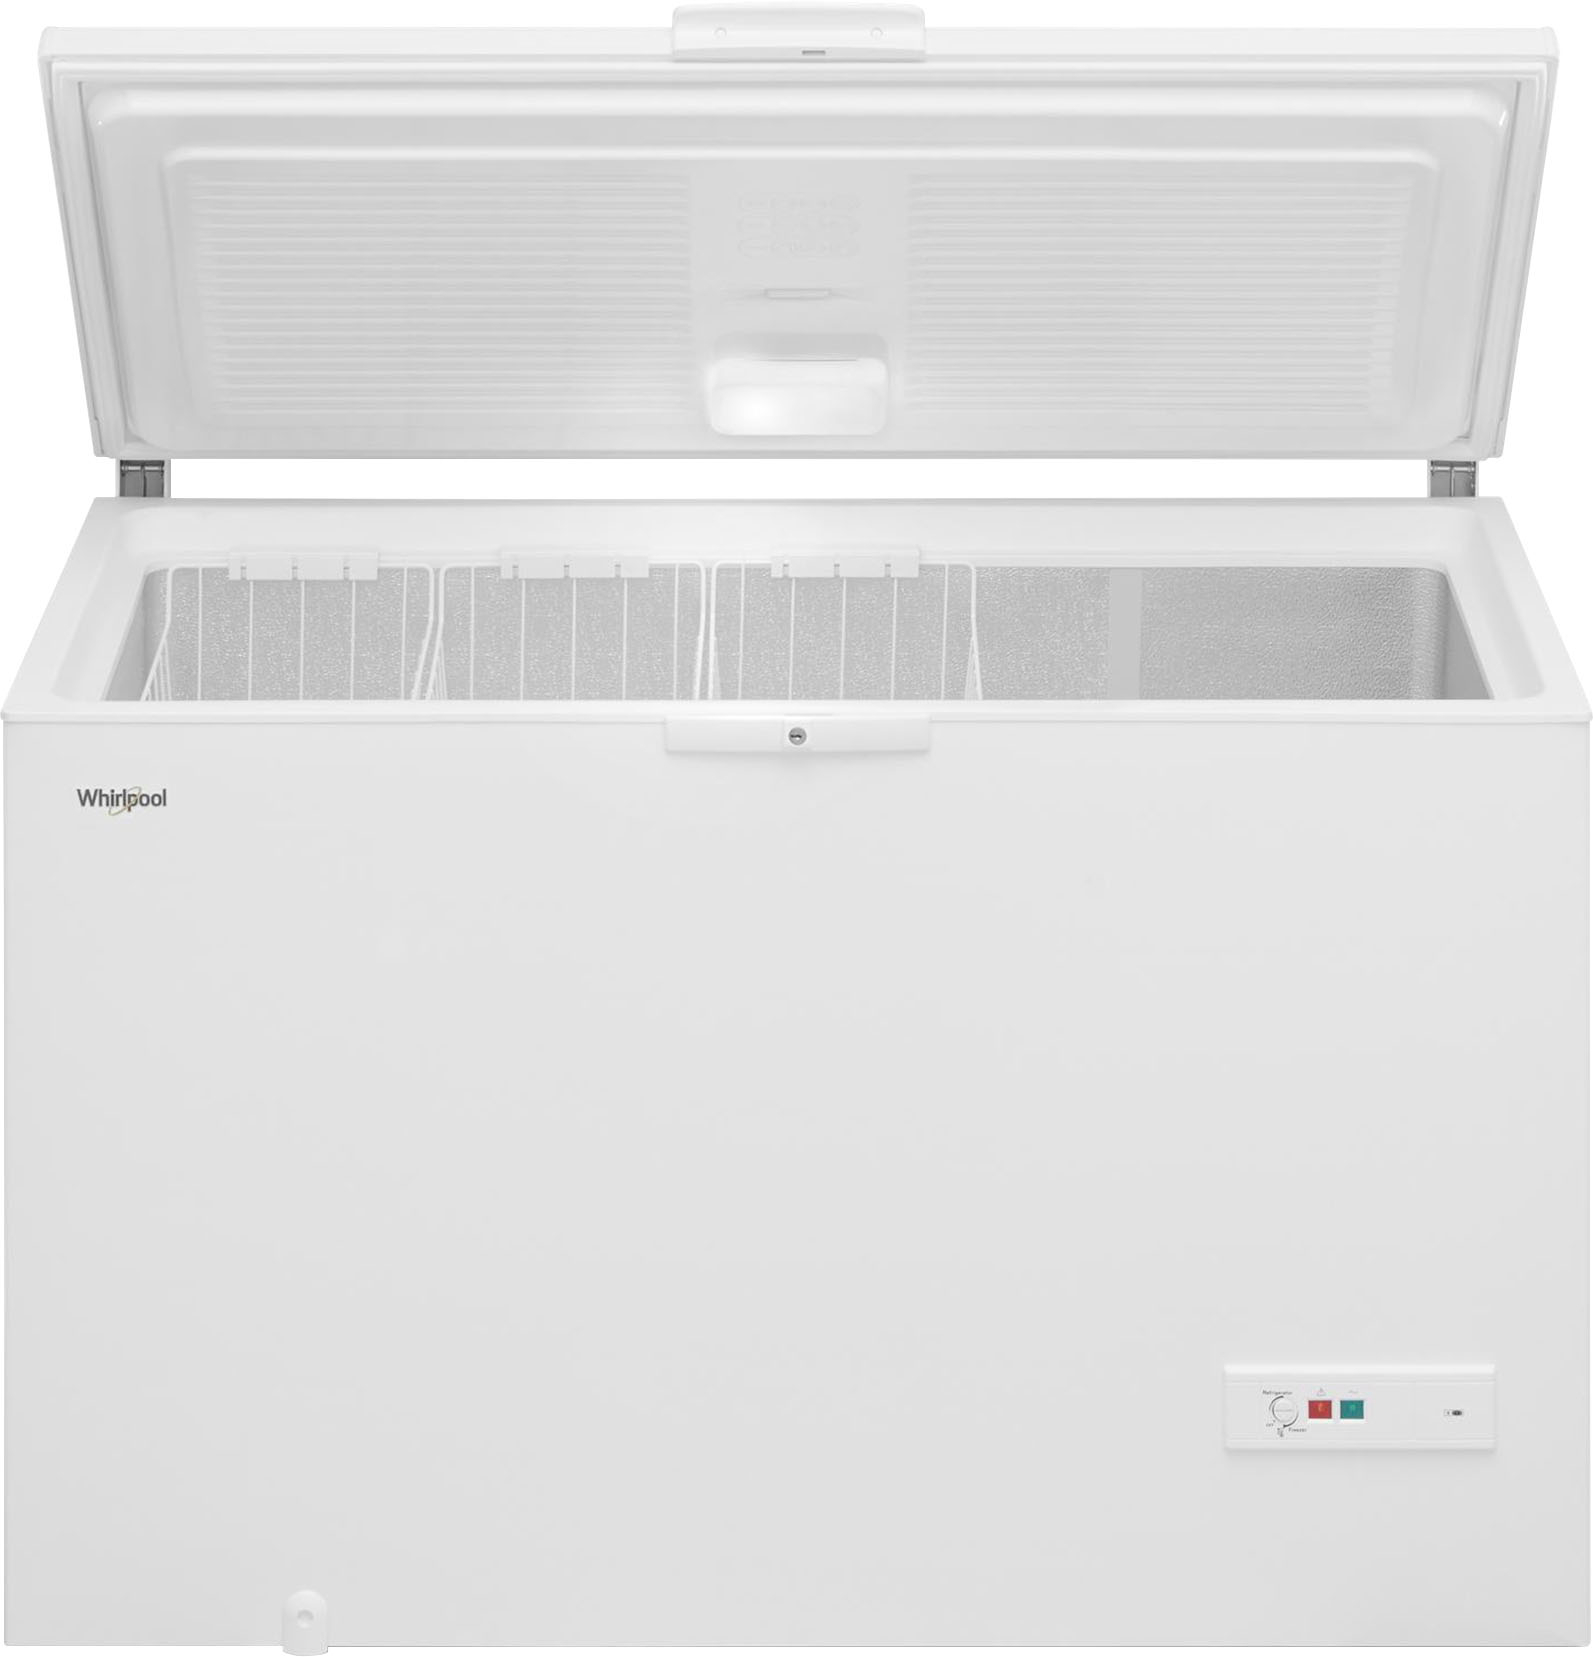 Angle View: GE - 5.0 Cu. Ft. Chest Freezer - White